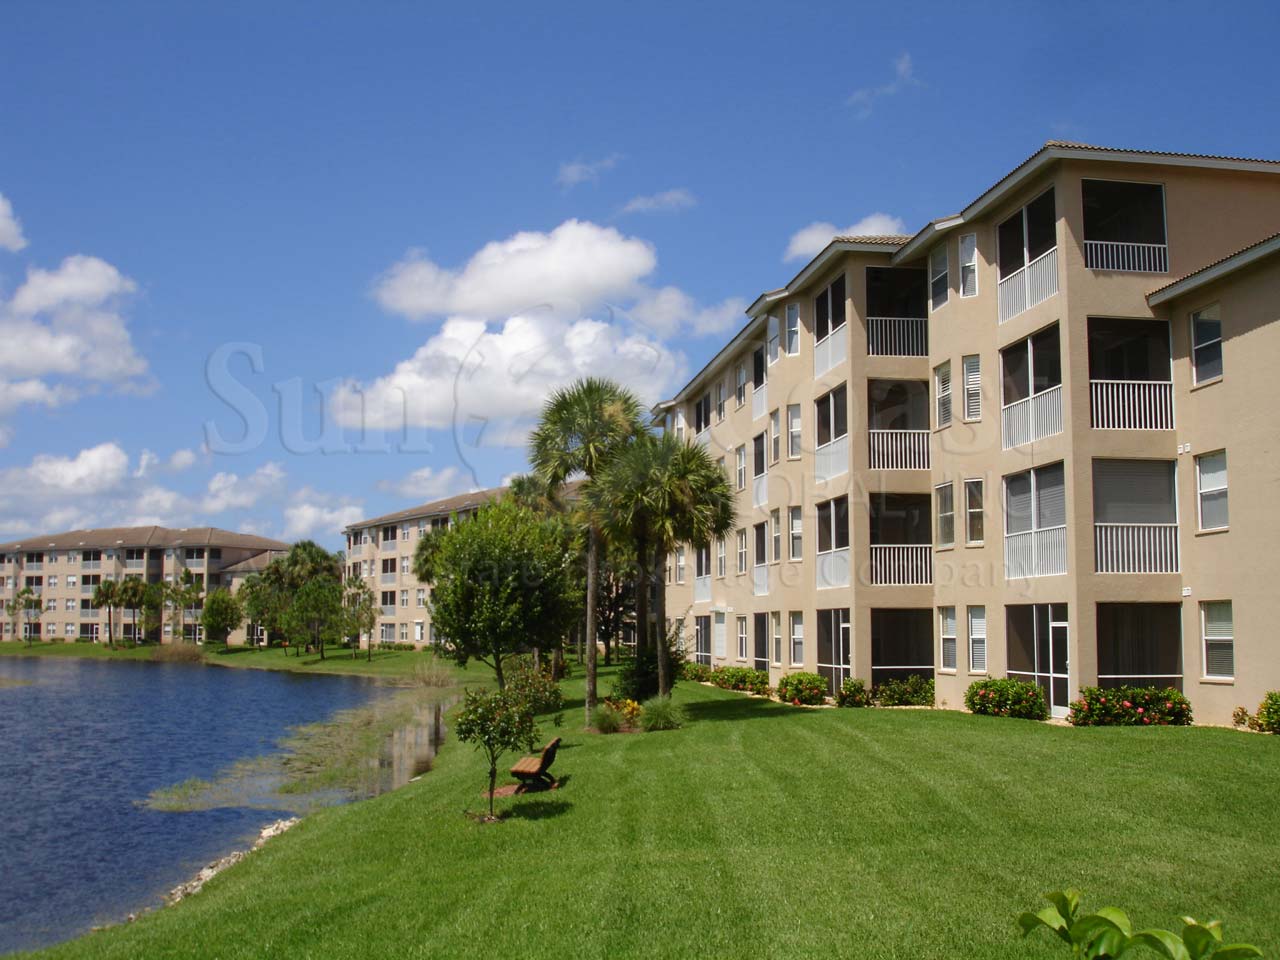 Terraces at Cedar Hammock is in a non gated community within Cedar Hammock and is comprised of 4-story condos with carports